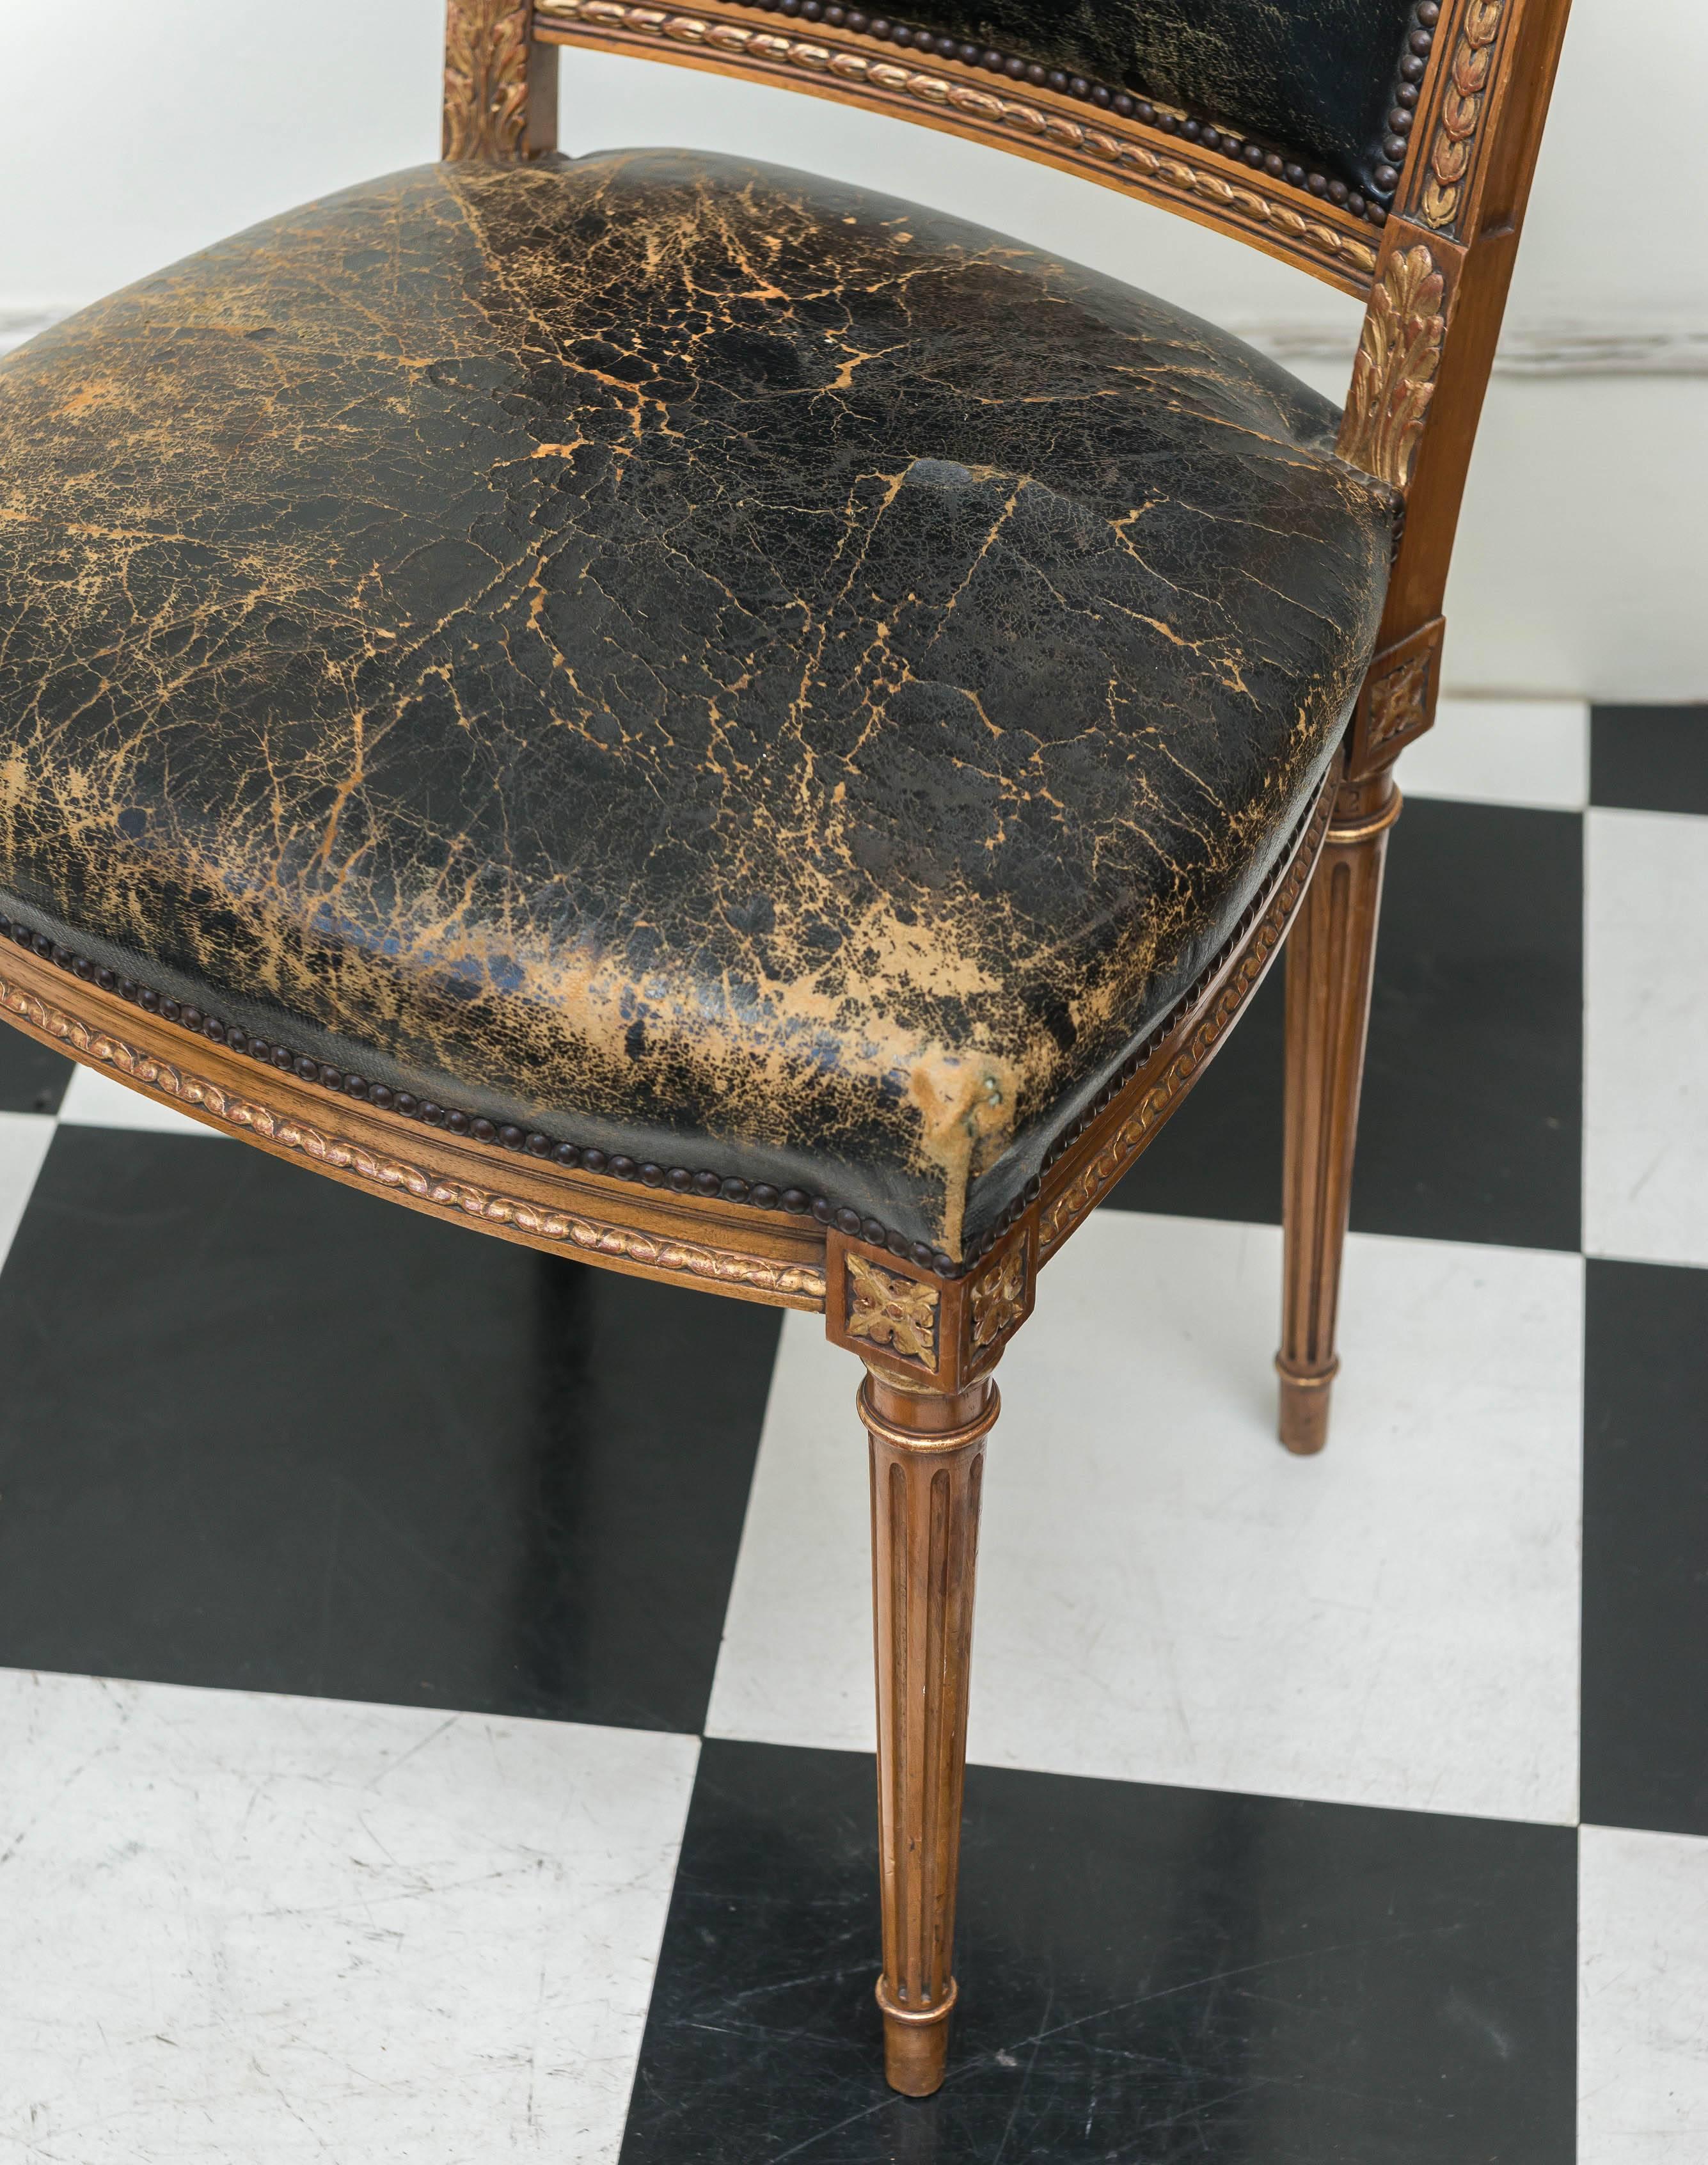 Louis XVI Revival Style chair by Simon Loscertales Bona, Zaragosa, Spain. Carved walnut details with gilt decoration and black leather with tack detail. Original label affixed to bottom 